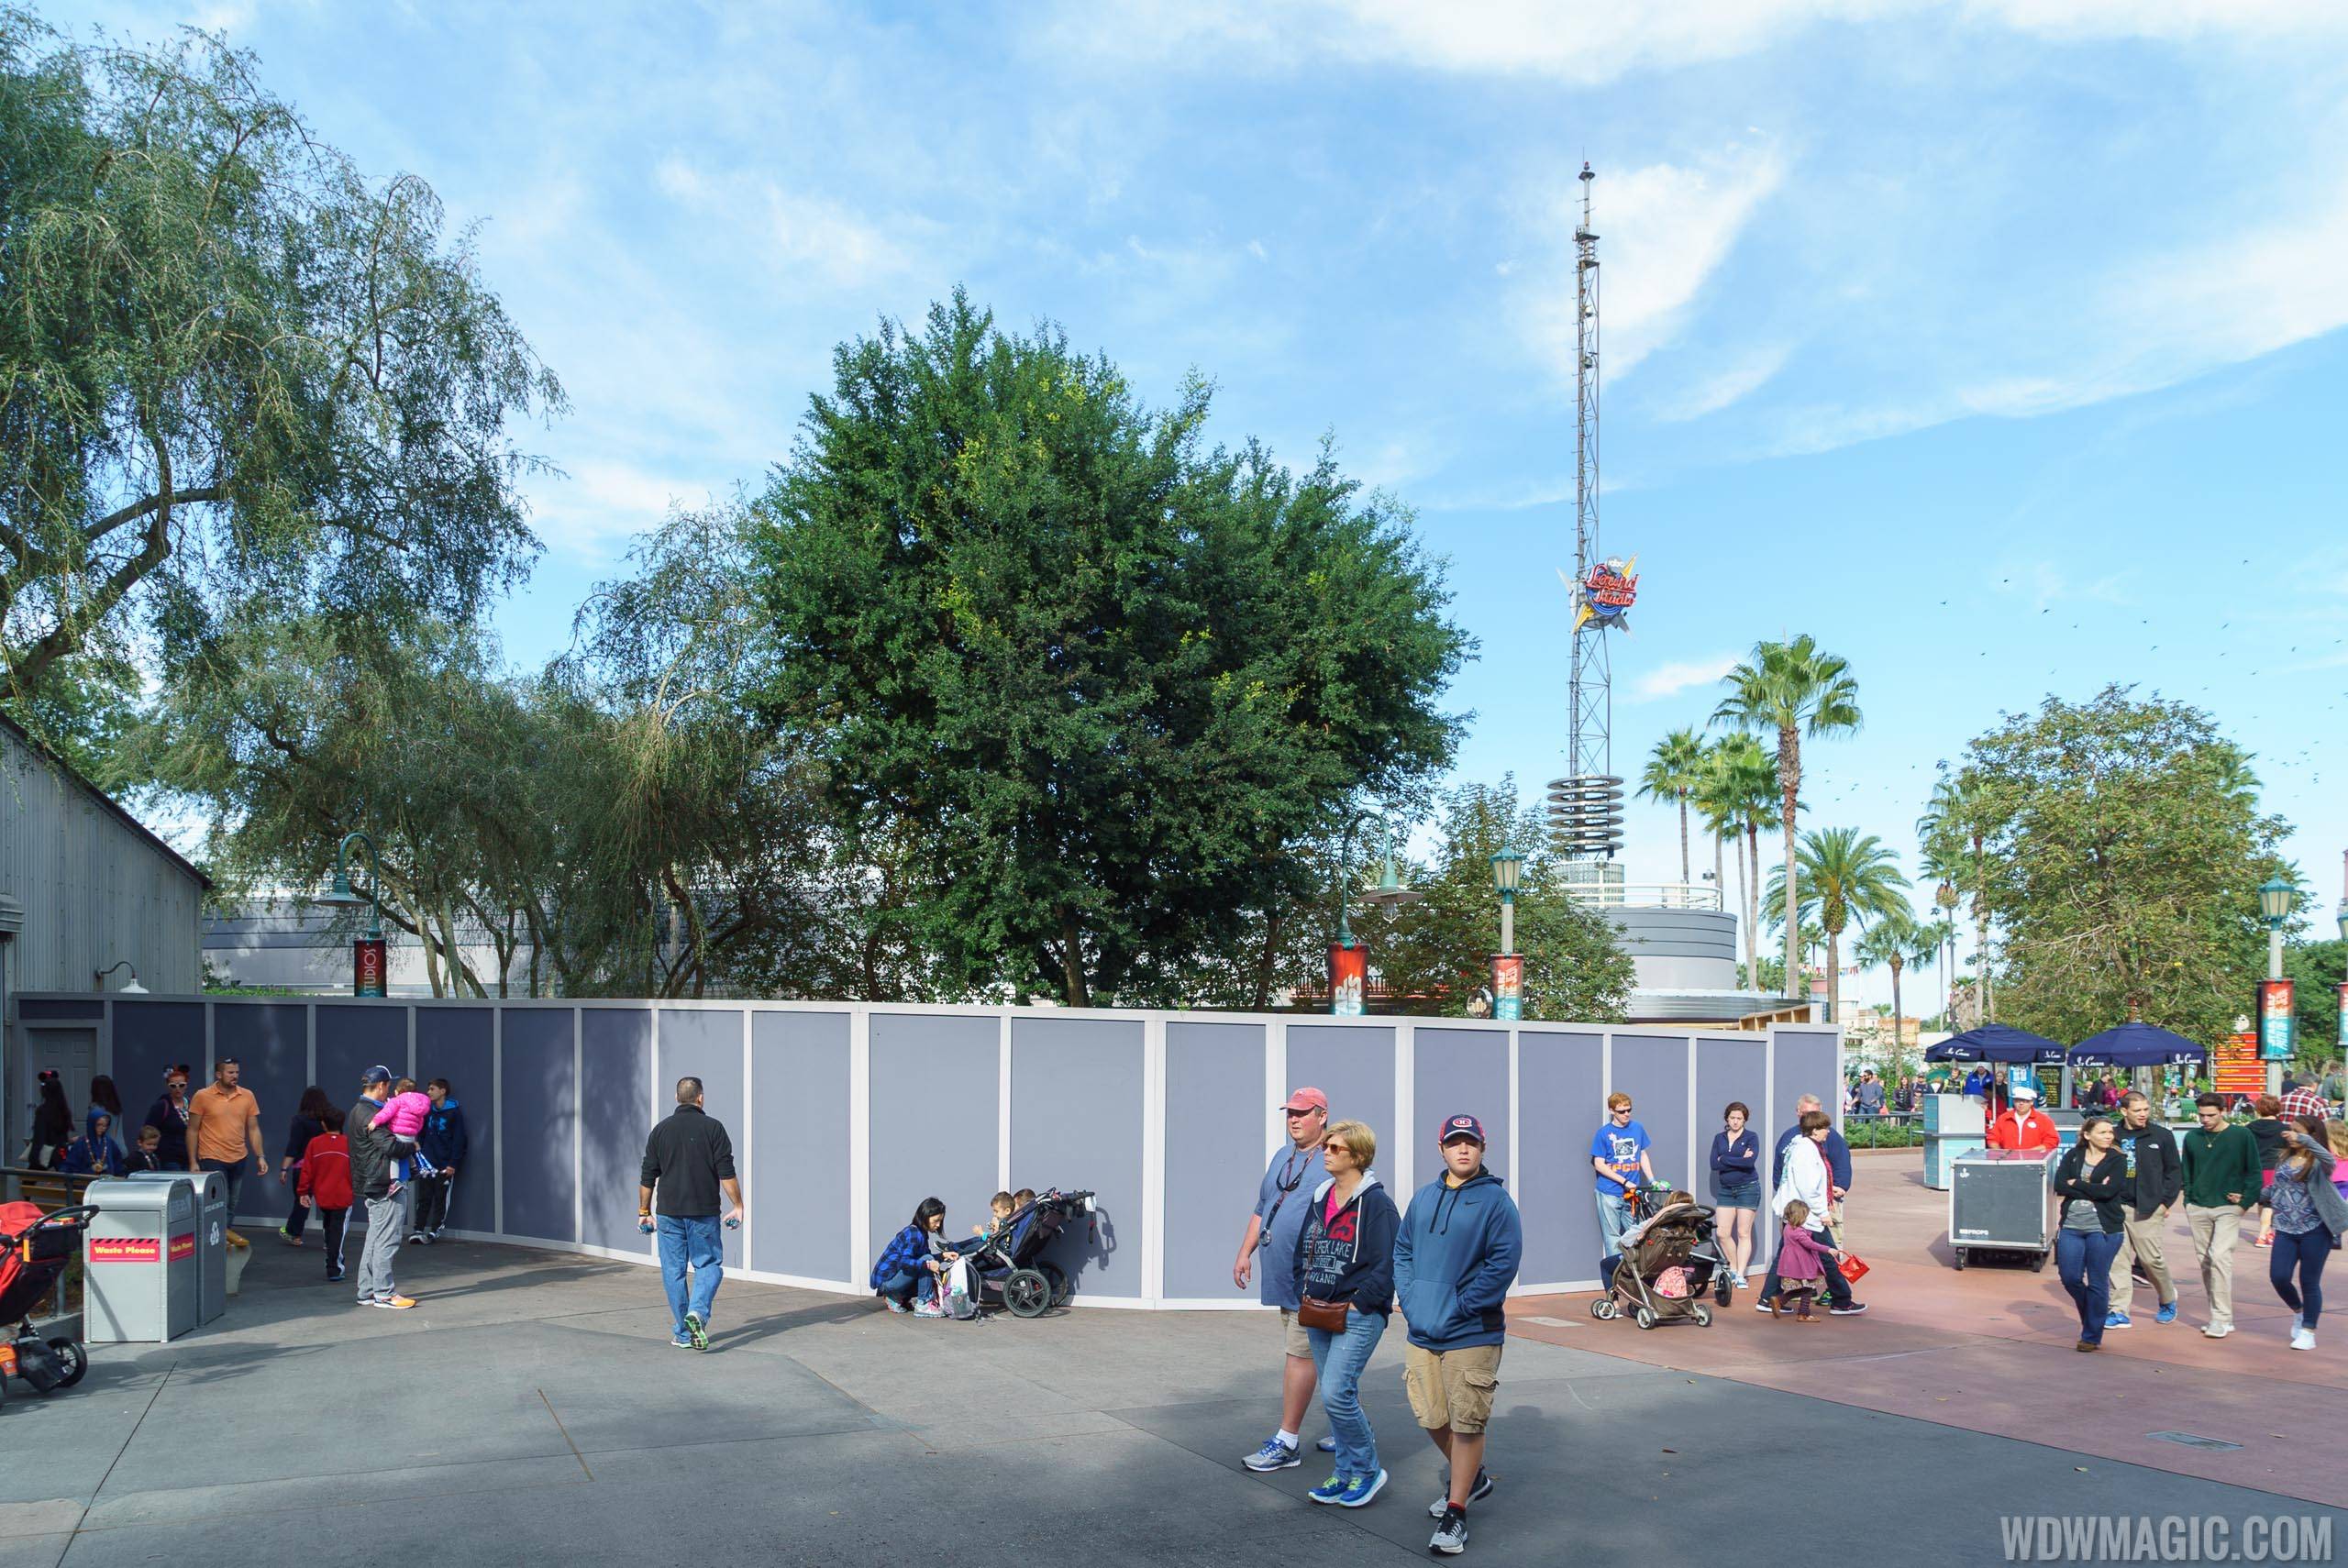 New meet and greets announced for Disney's Hollywood Studios